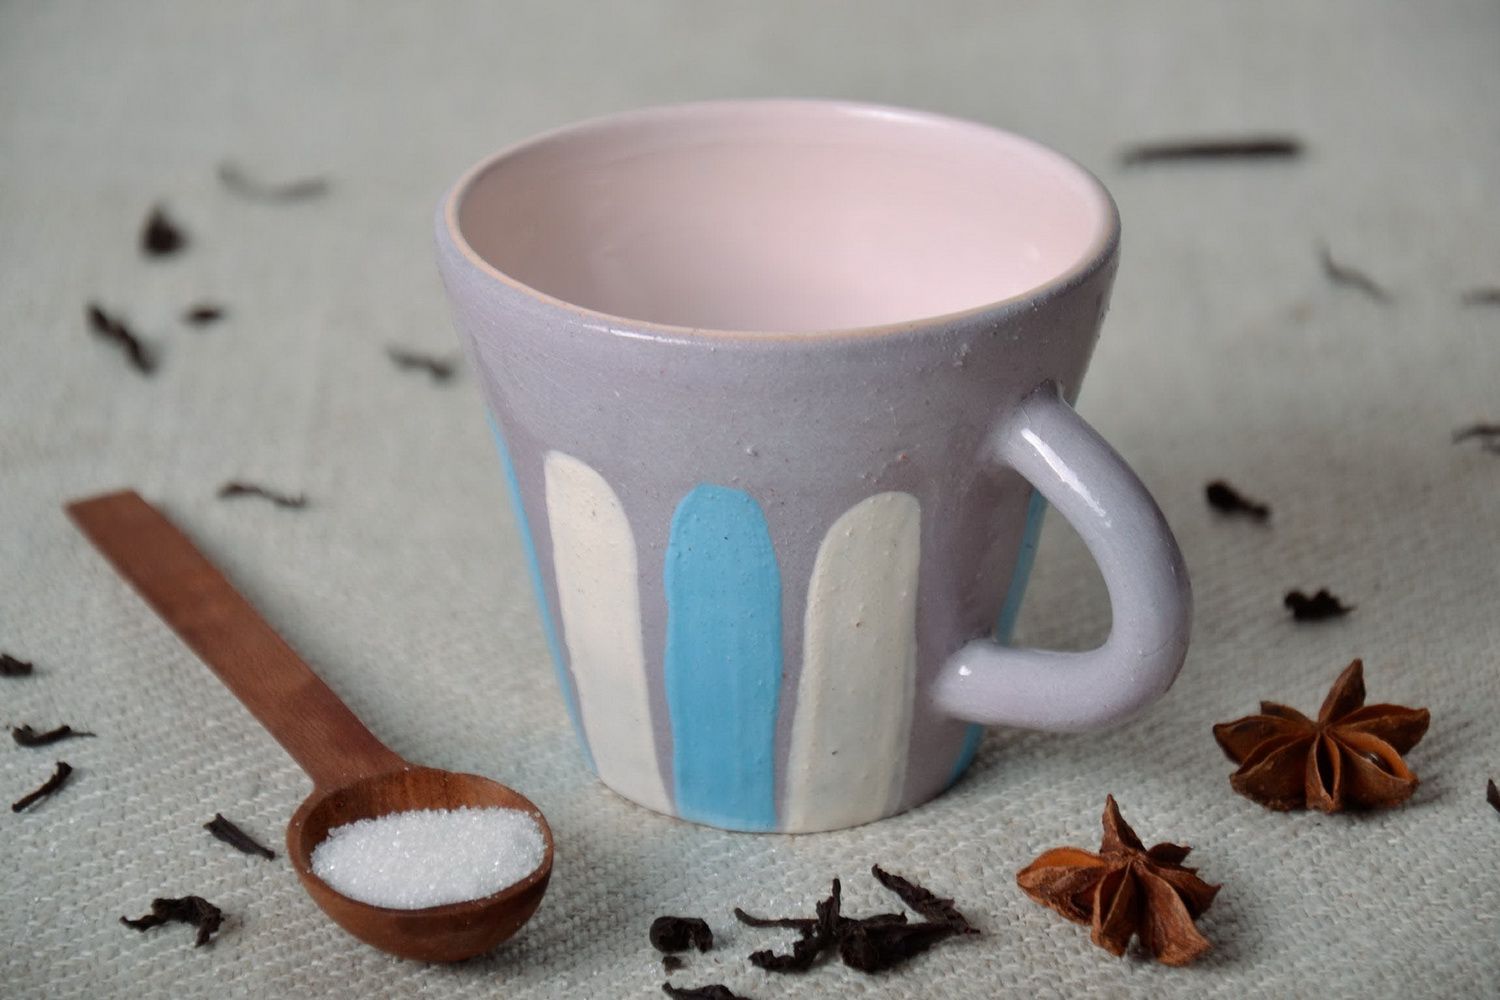 Porcelain 3 oz tea cup in grey, white, and blue colors photo 1